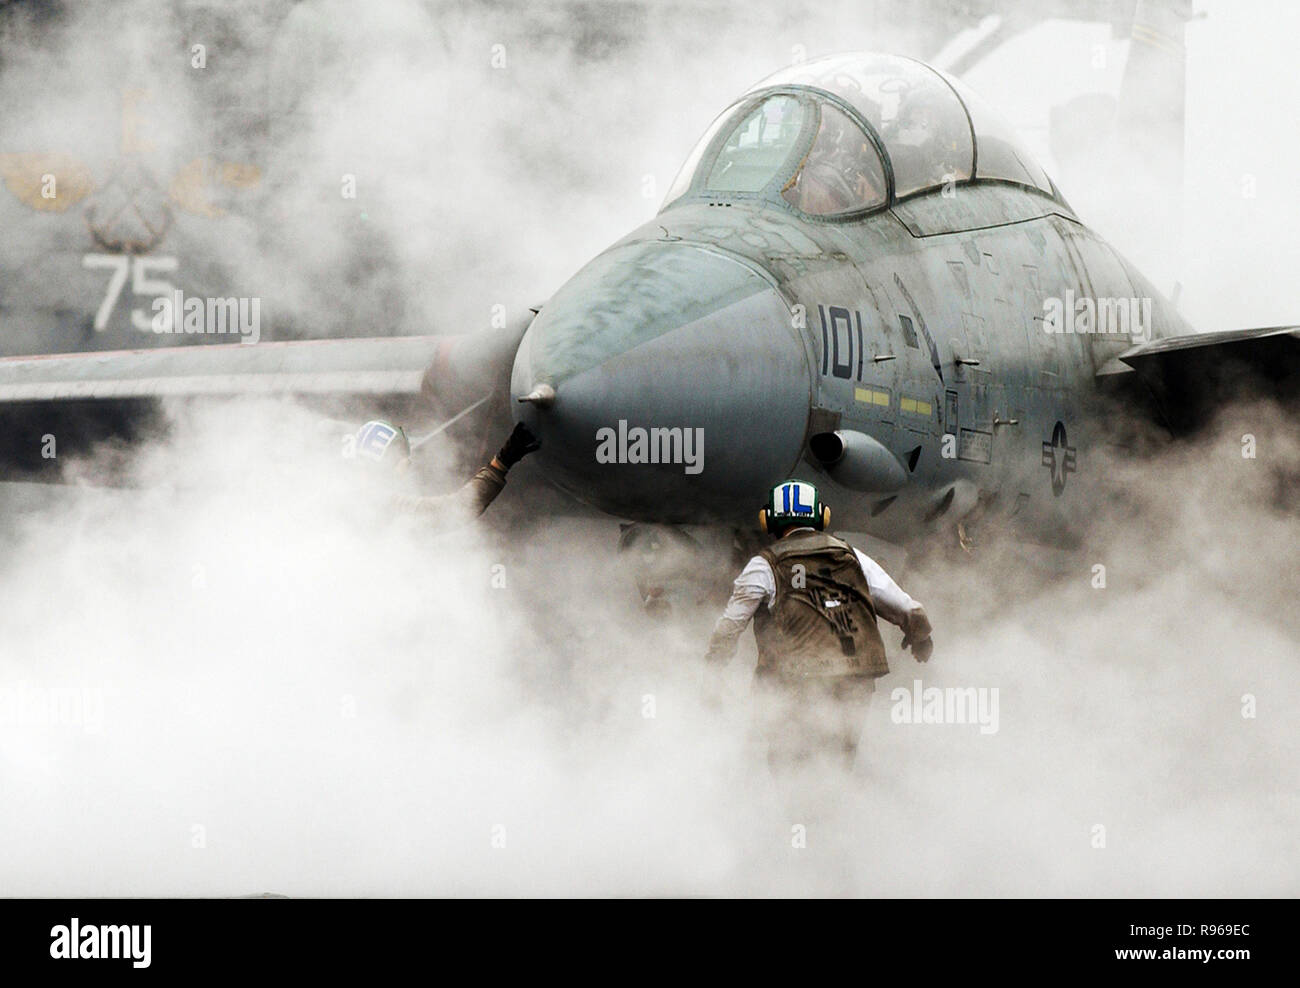 Steam from the catapult envelopes a Navy F-14 Tomcat as a flight crew prepares it for launch from the aircraft carrier USS Harry S. Truman (CVN 75)  while underway in the Persian Gulf.    DoD photo by Photographer's Mate Airman Ryan O'Connor, U.S. Navy Stock Photo